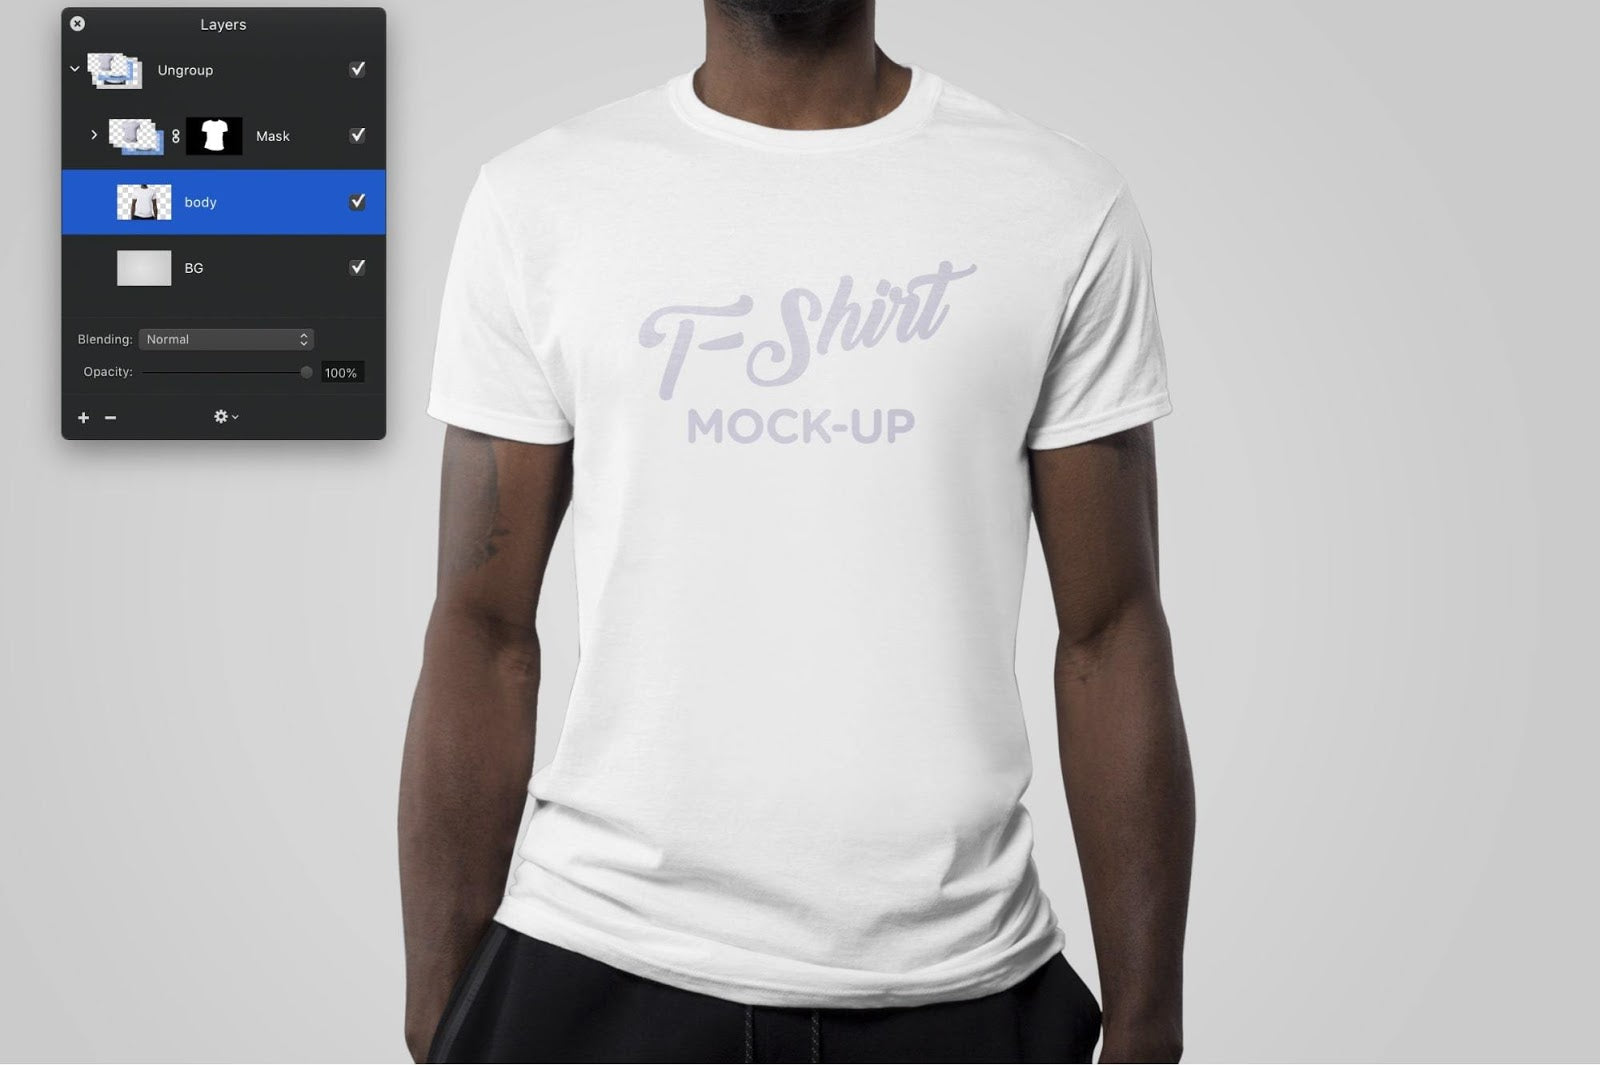 A digital design menu beside a person modeling a white t-shirt with a custom graphic.